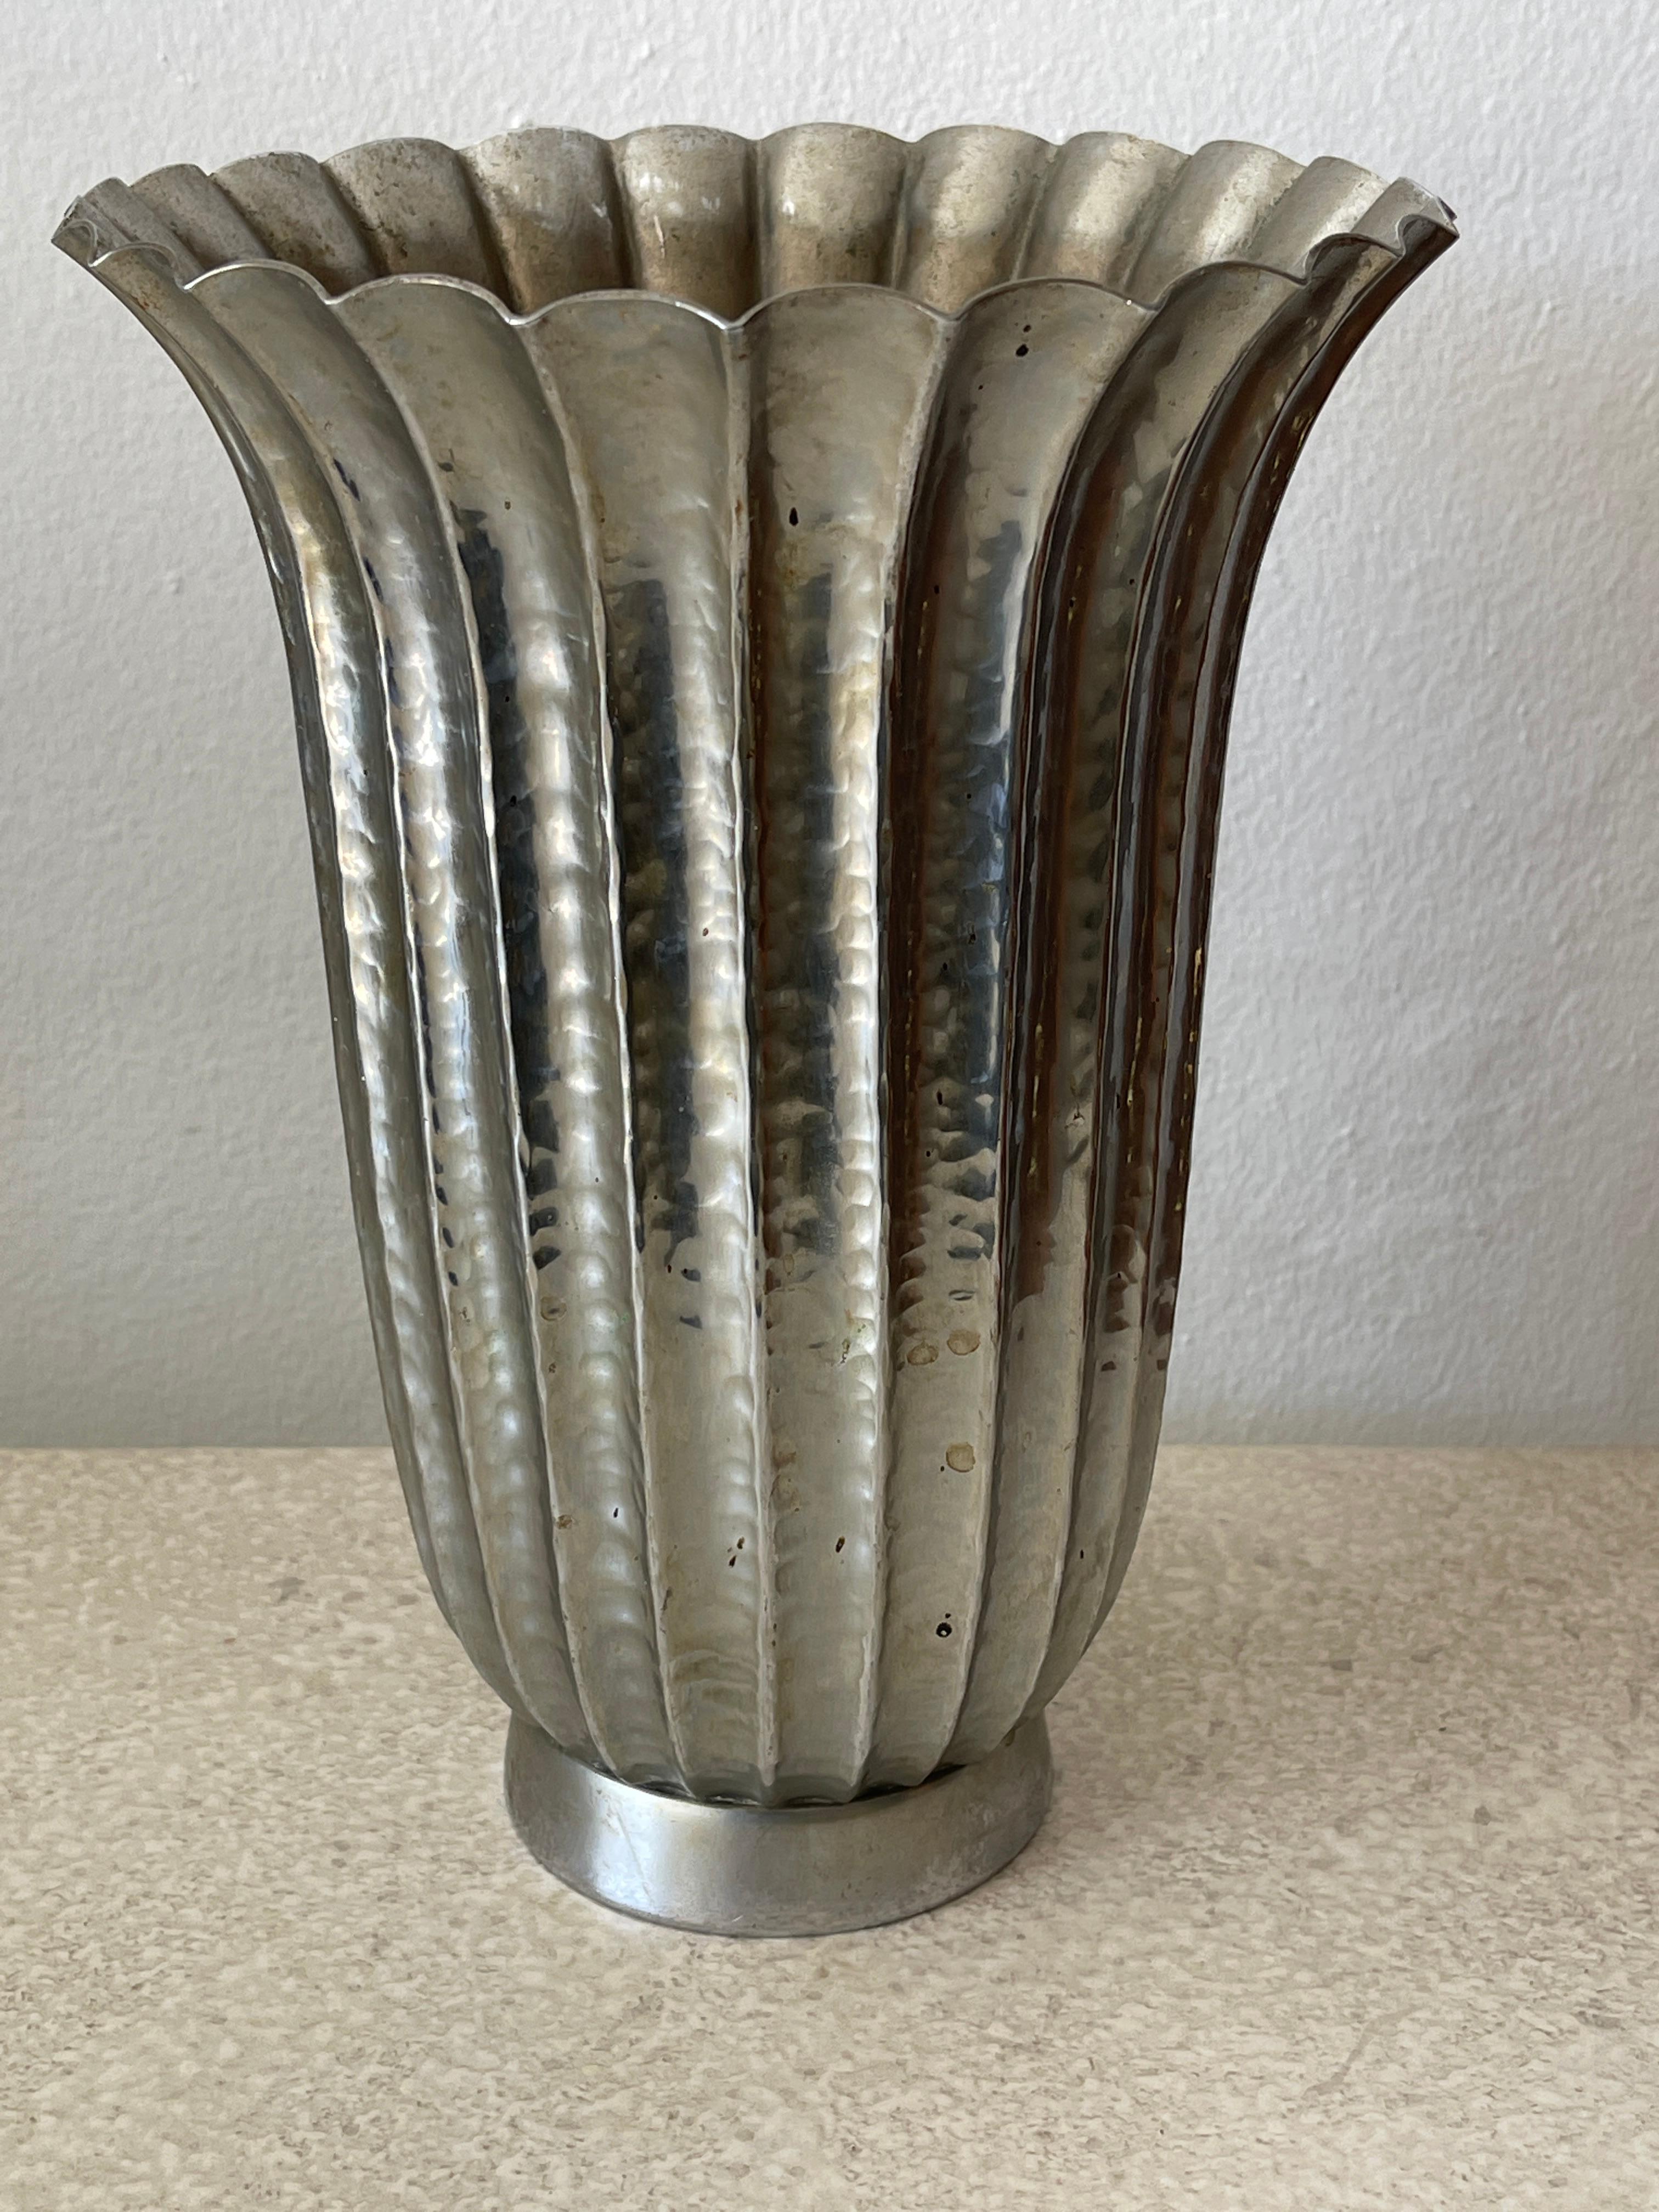 Viennese Secessionist Style Fluted Vase 1